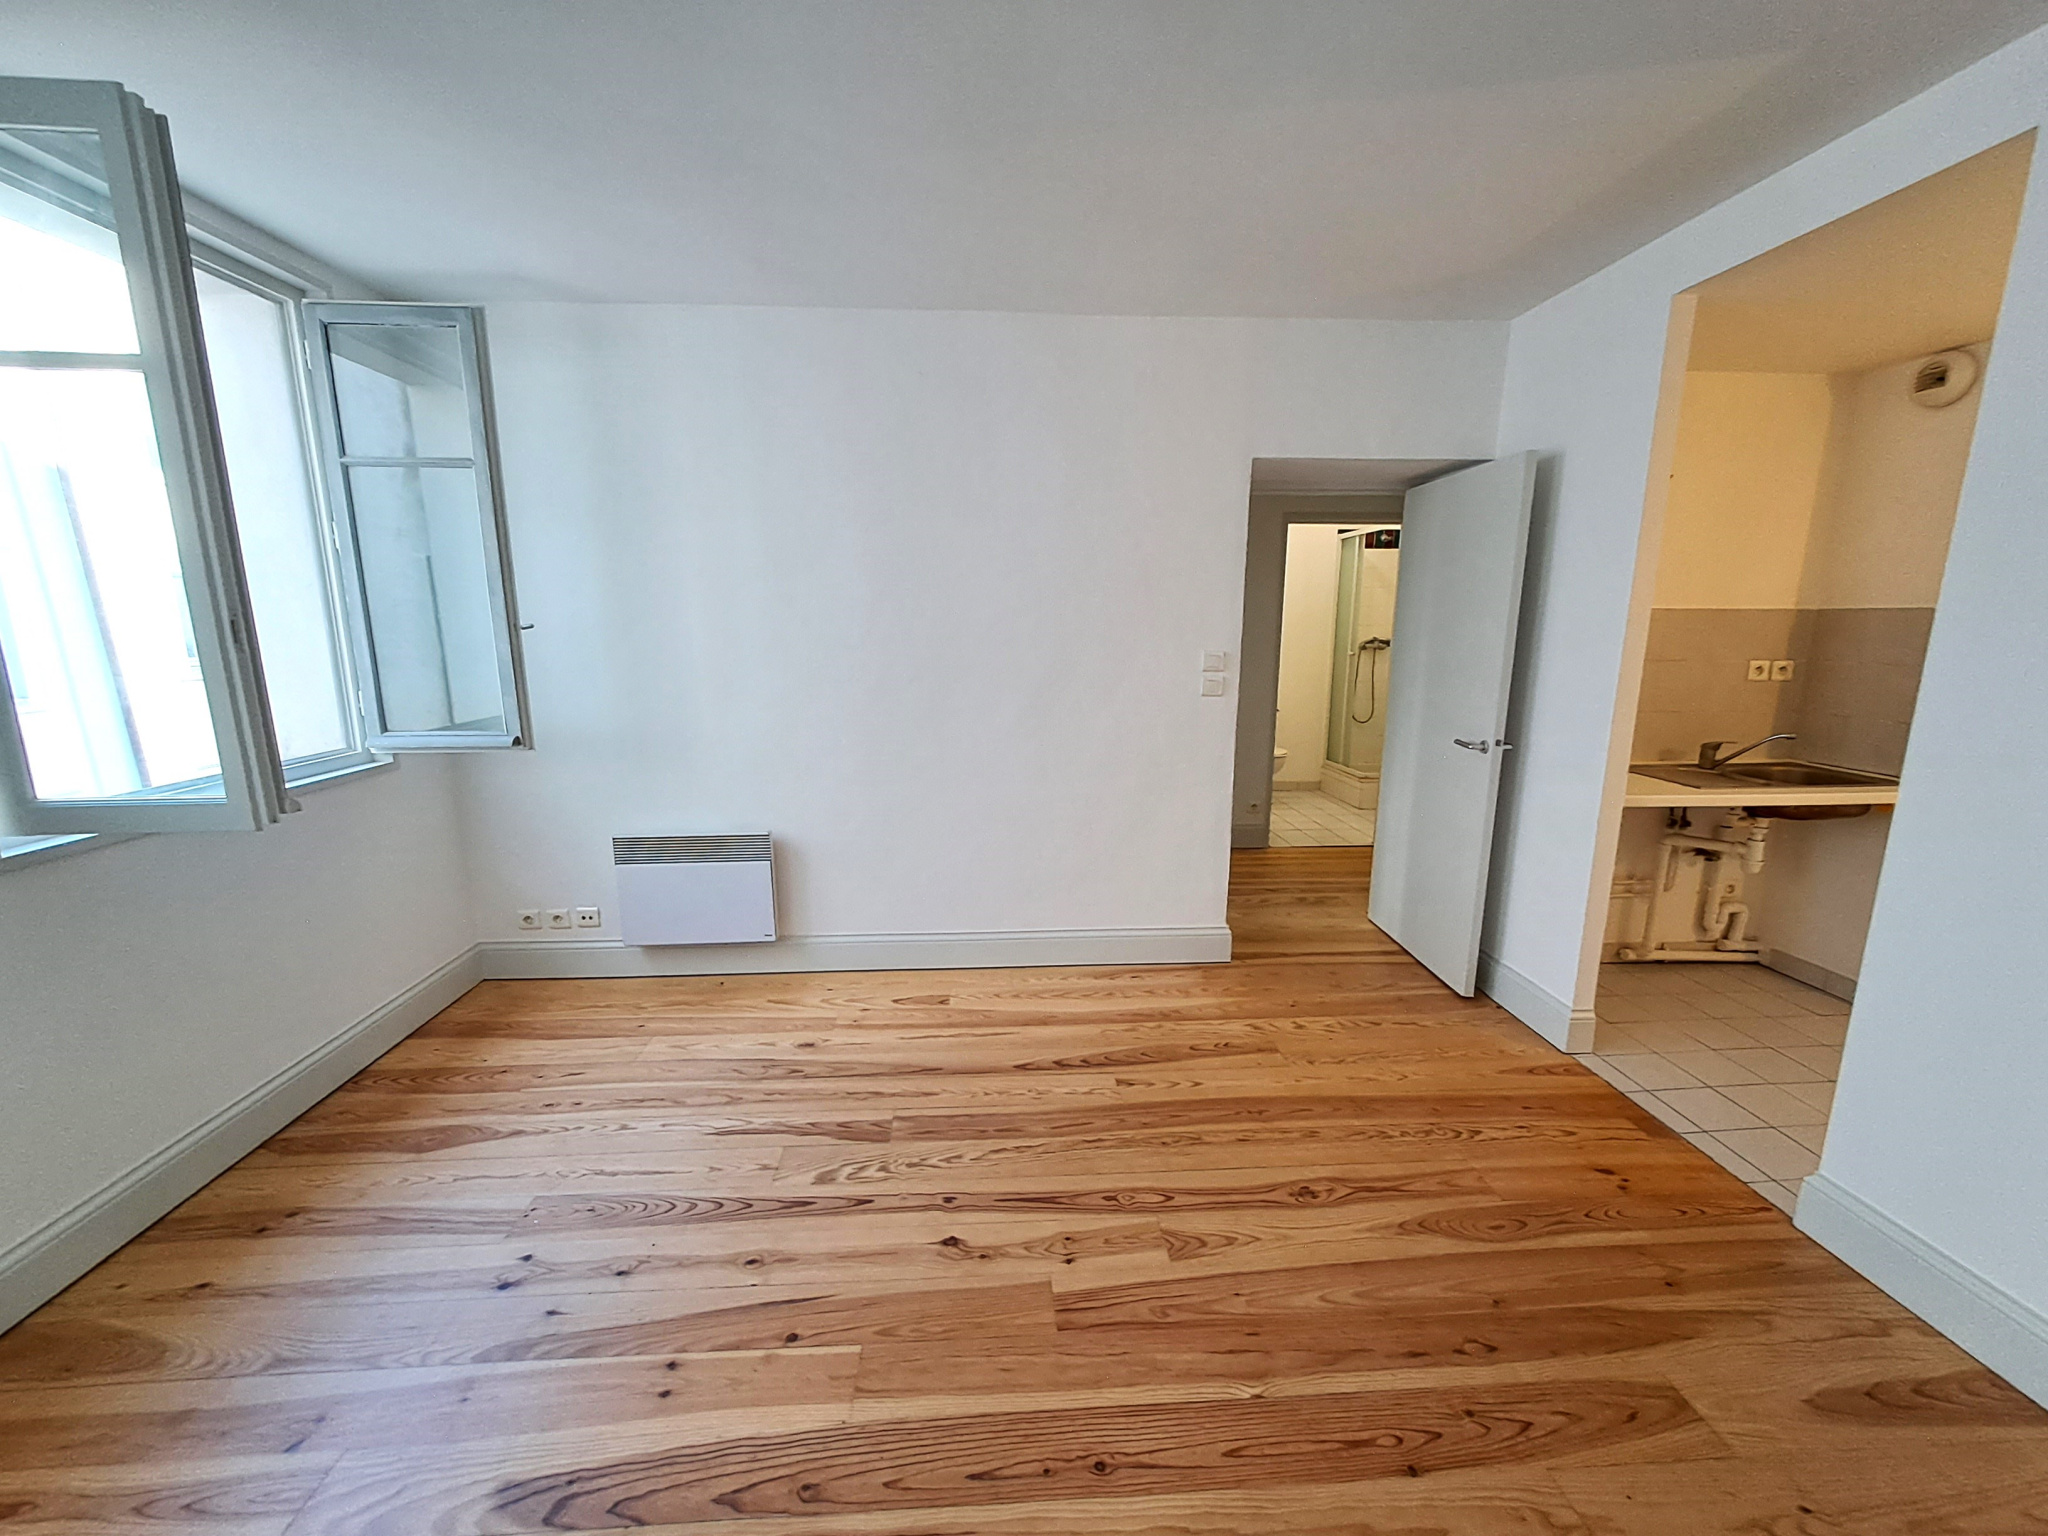 for sale flat in BAYONNE - 166 000